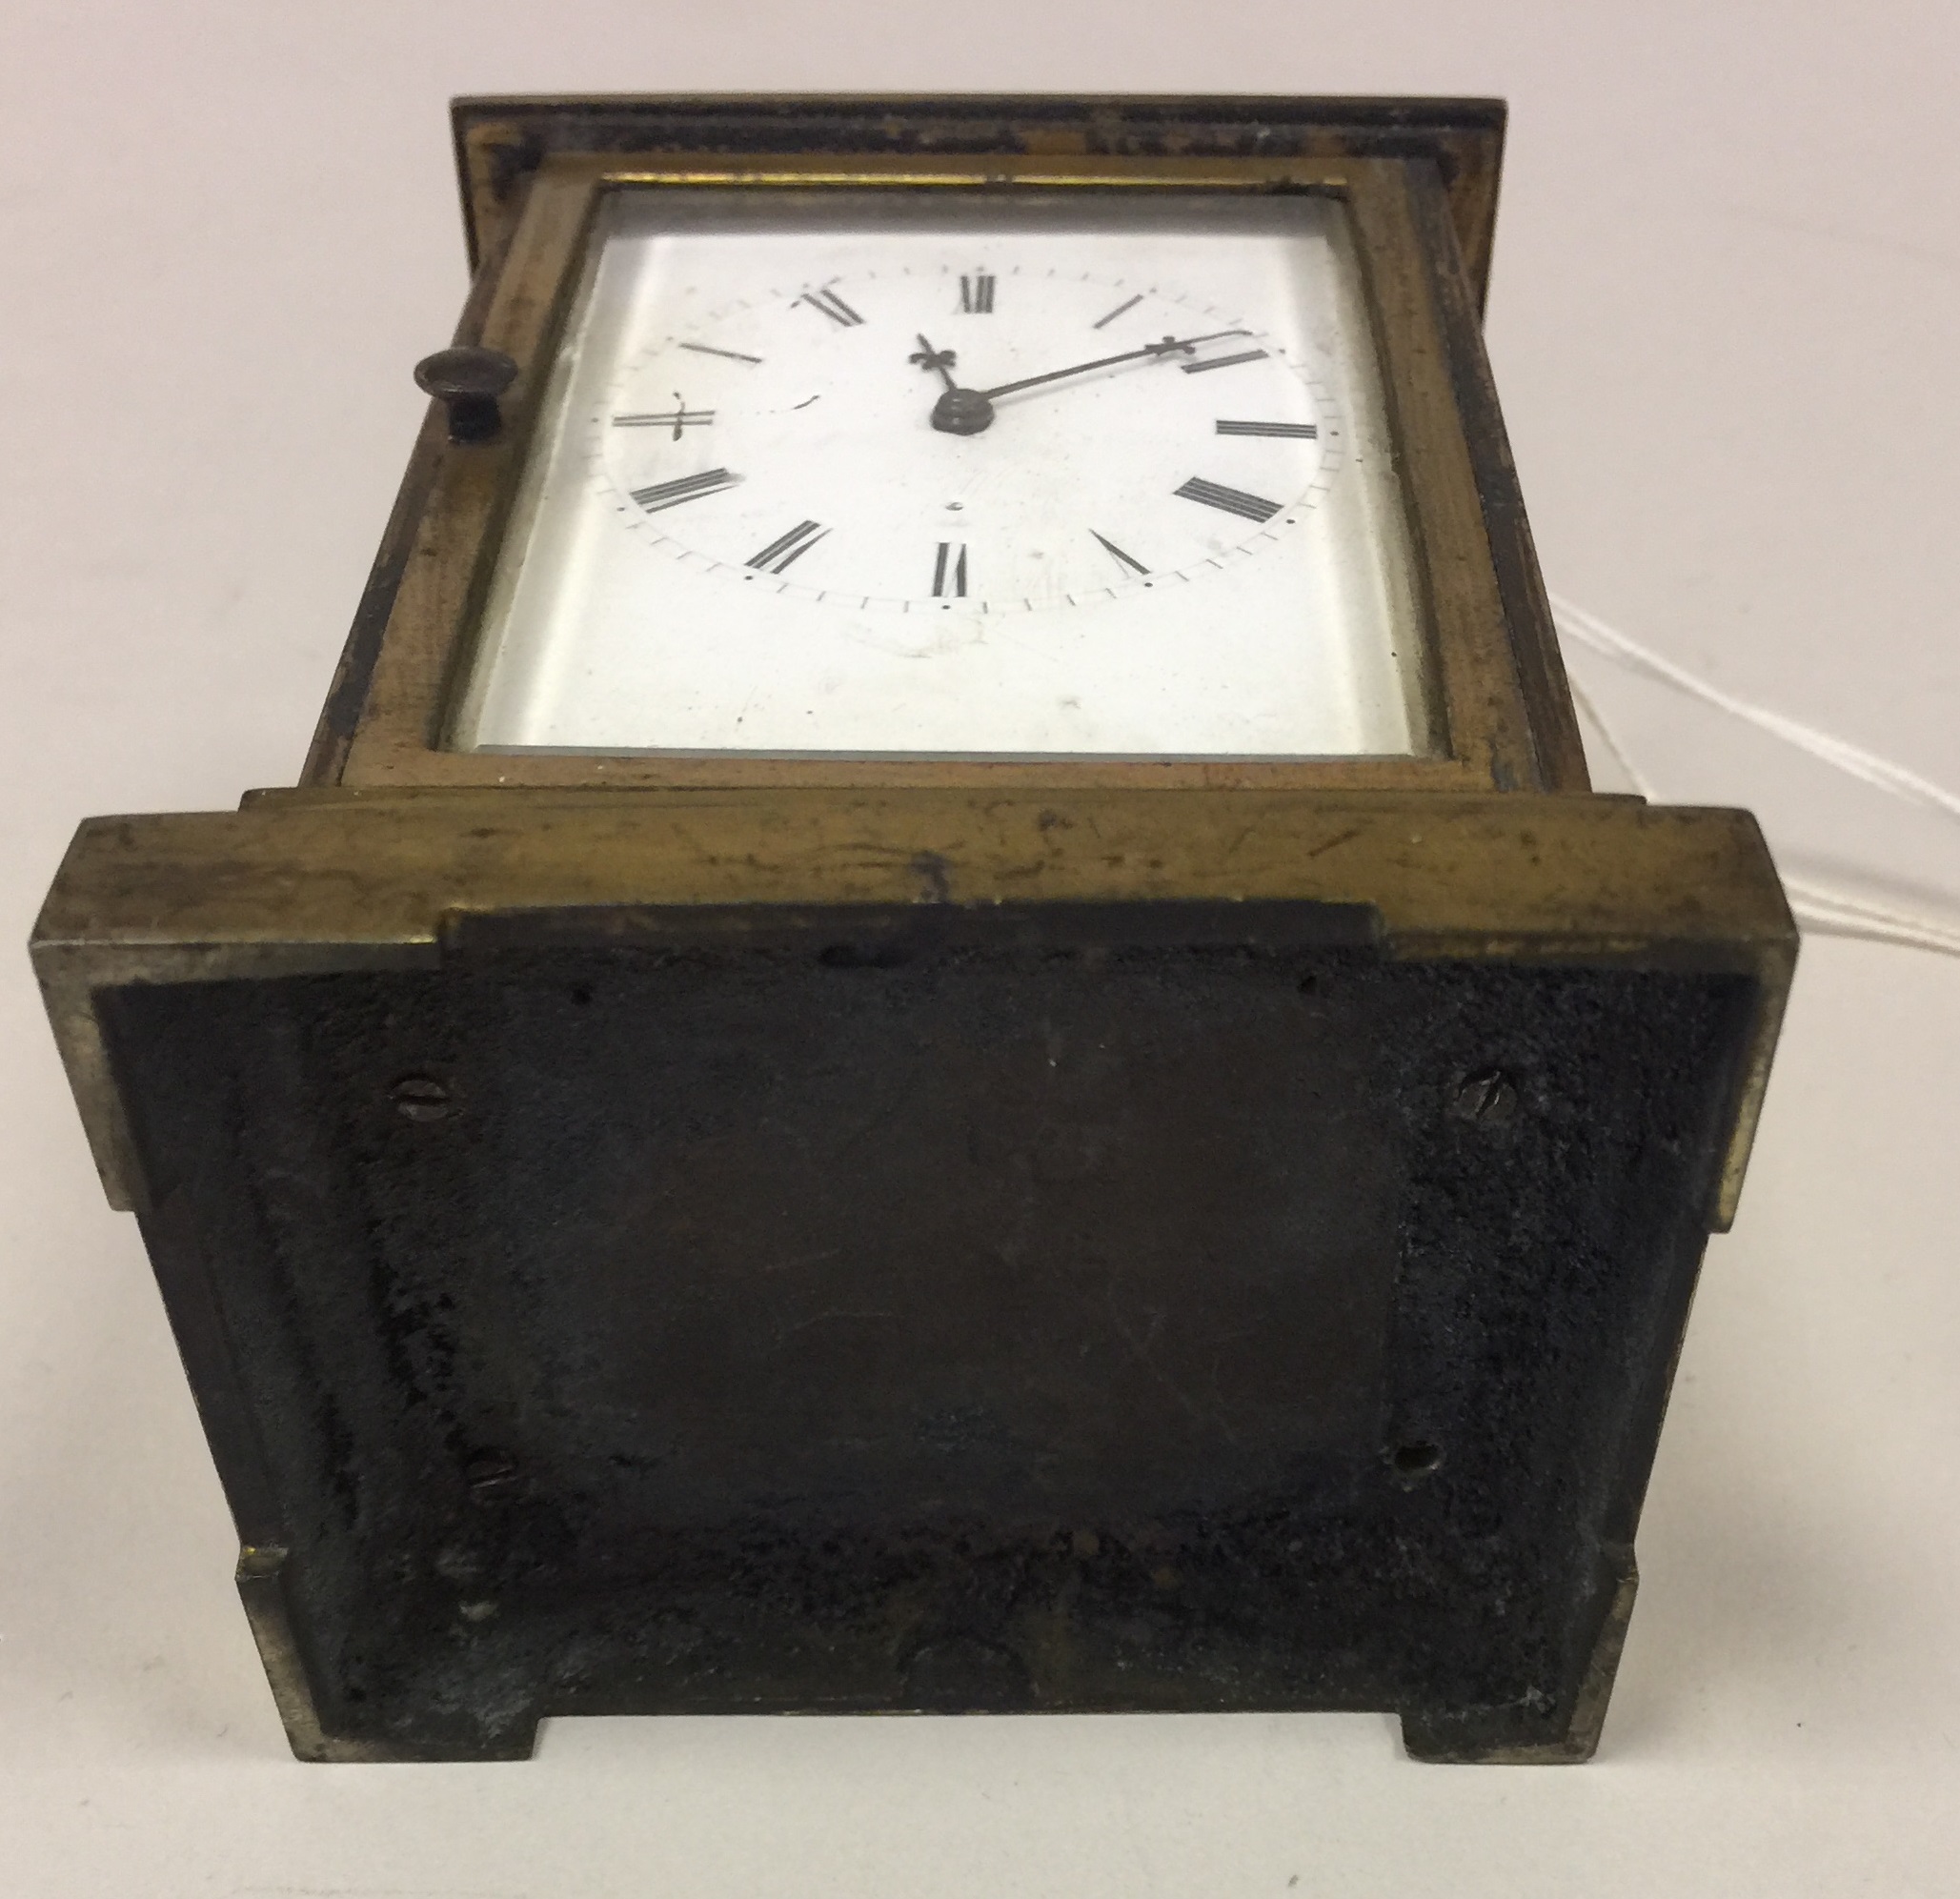 ENGLISH 19TH CENTURY CARRIAGE CLOCK. A gilt English fusee carriage clock repeater, dated to 1880. - Image 2 of 8